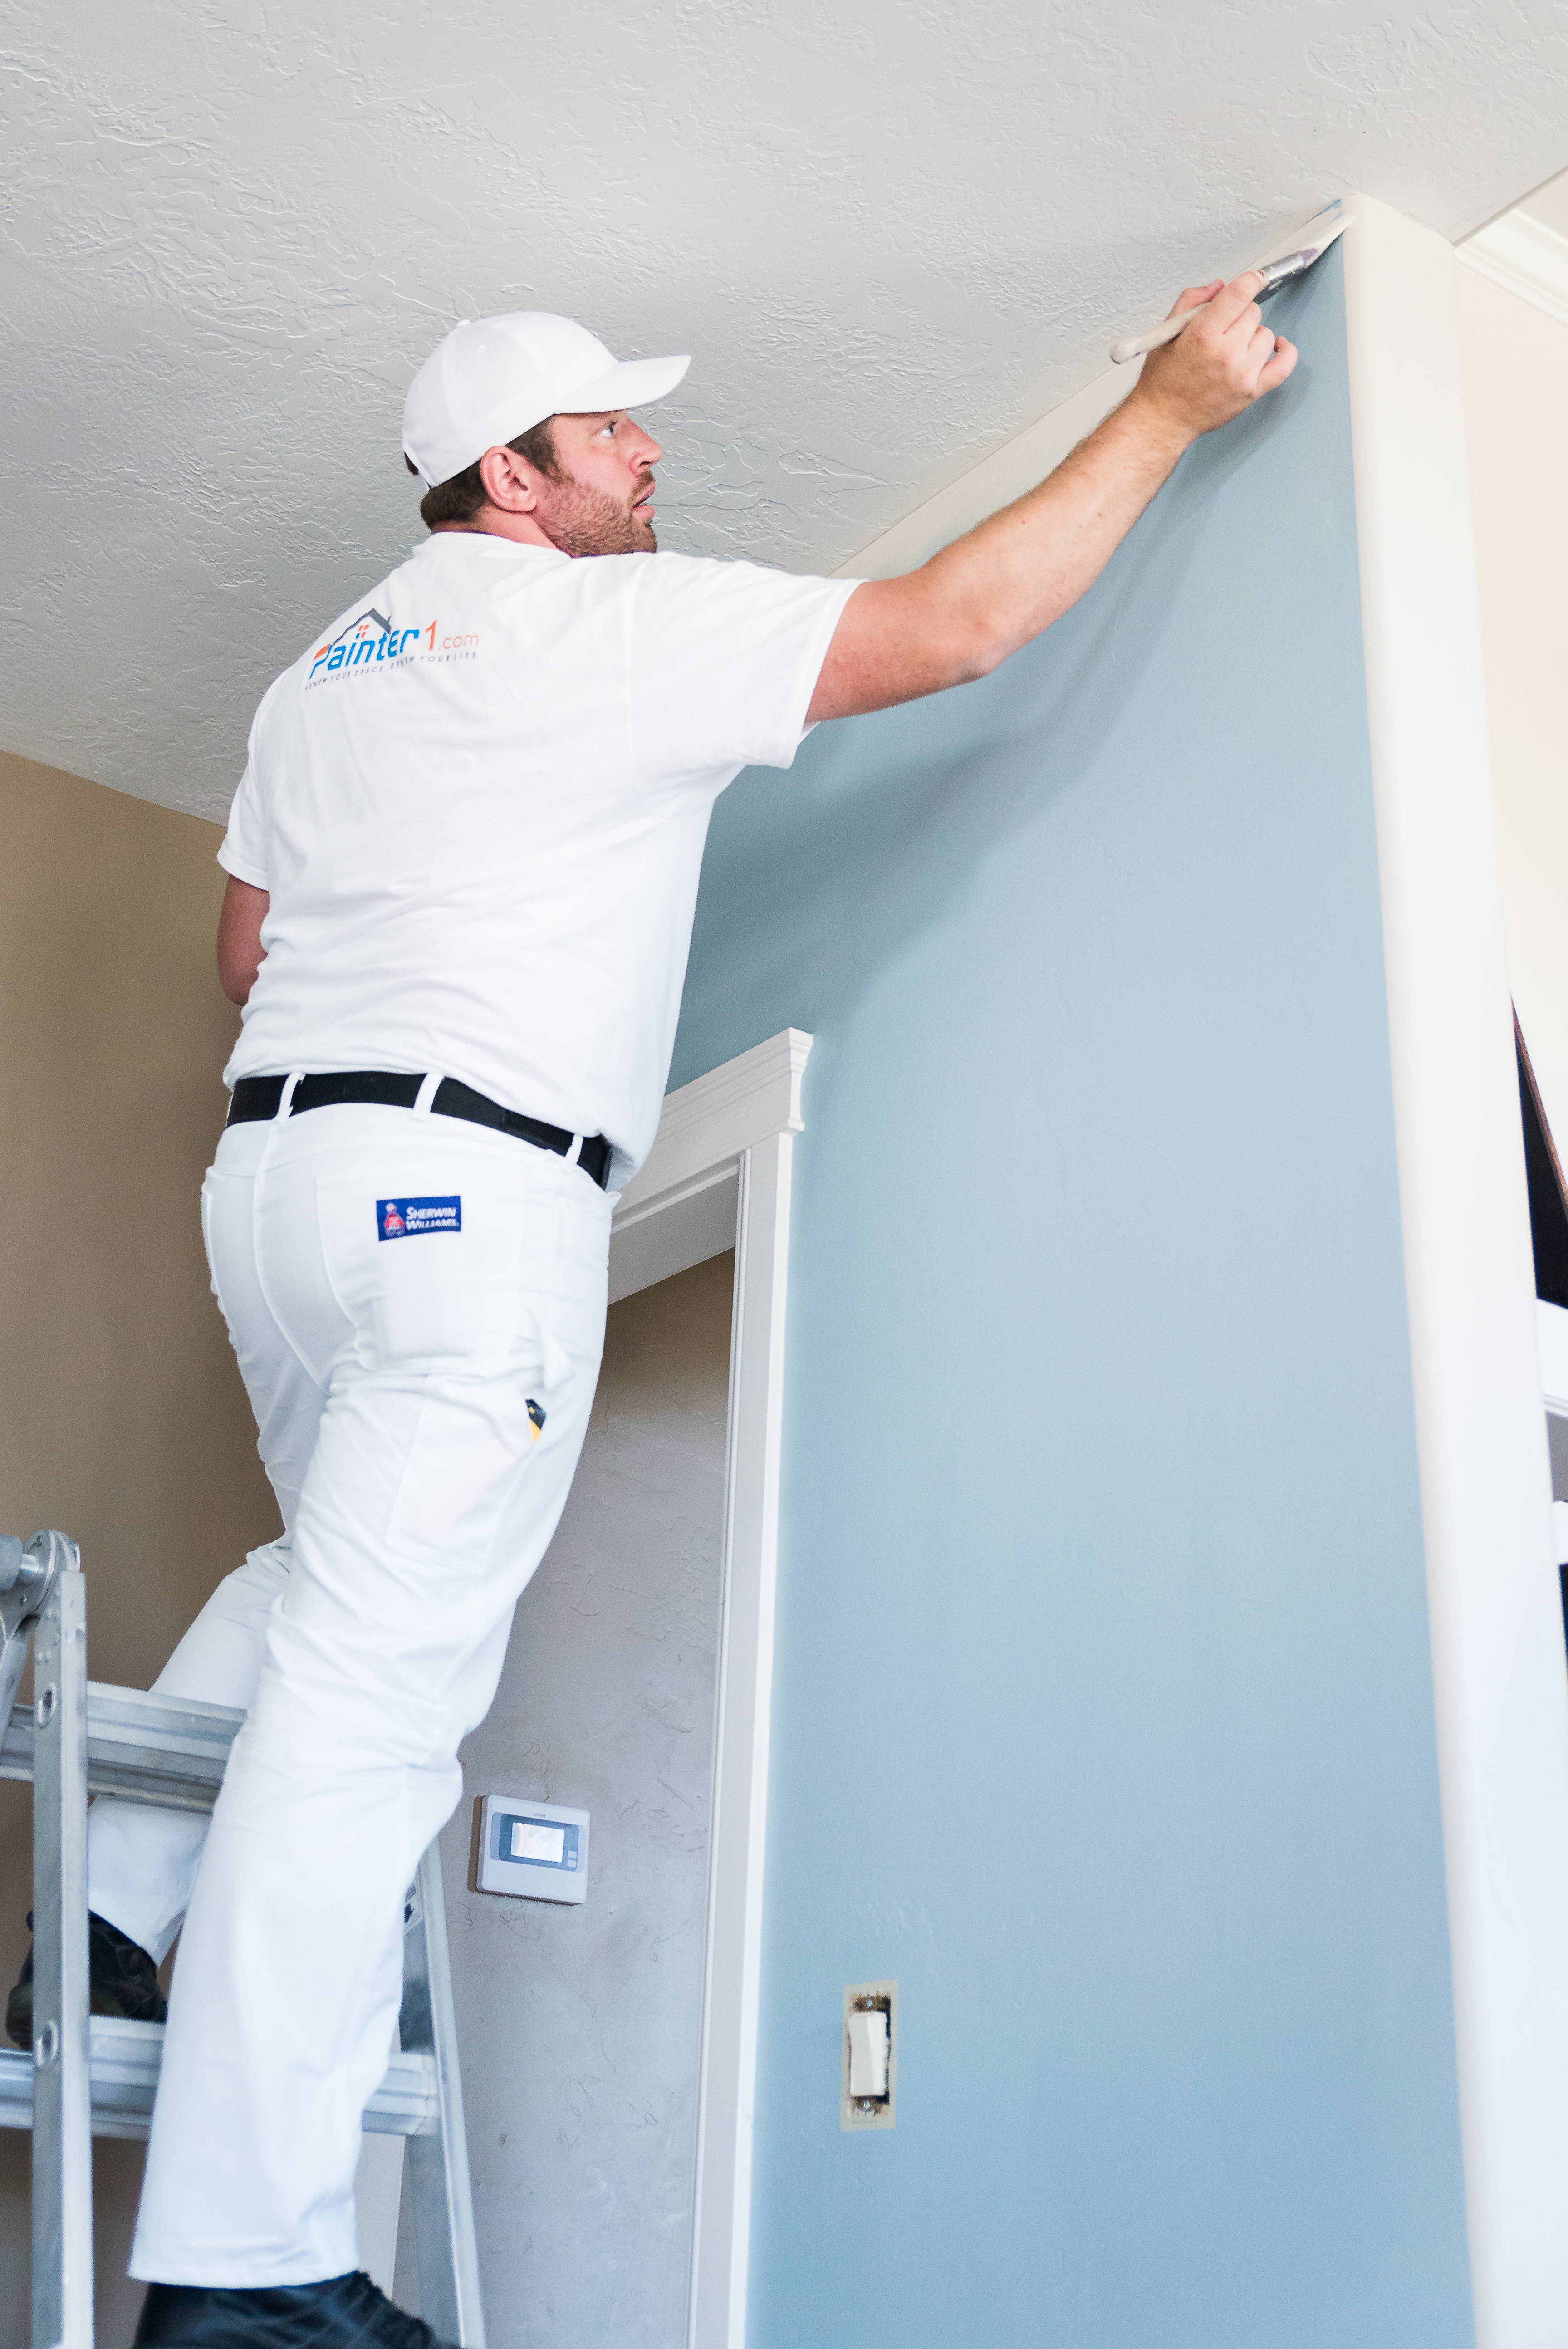 If you are searching for small business ideas, Painter1 is the best painting franchise near you.